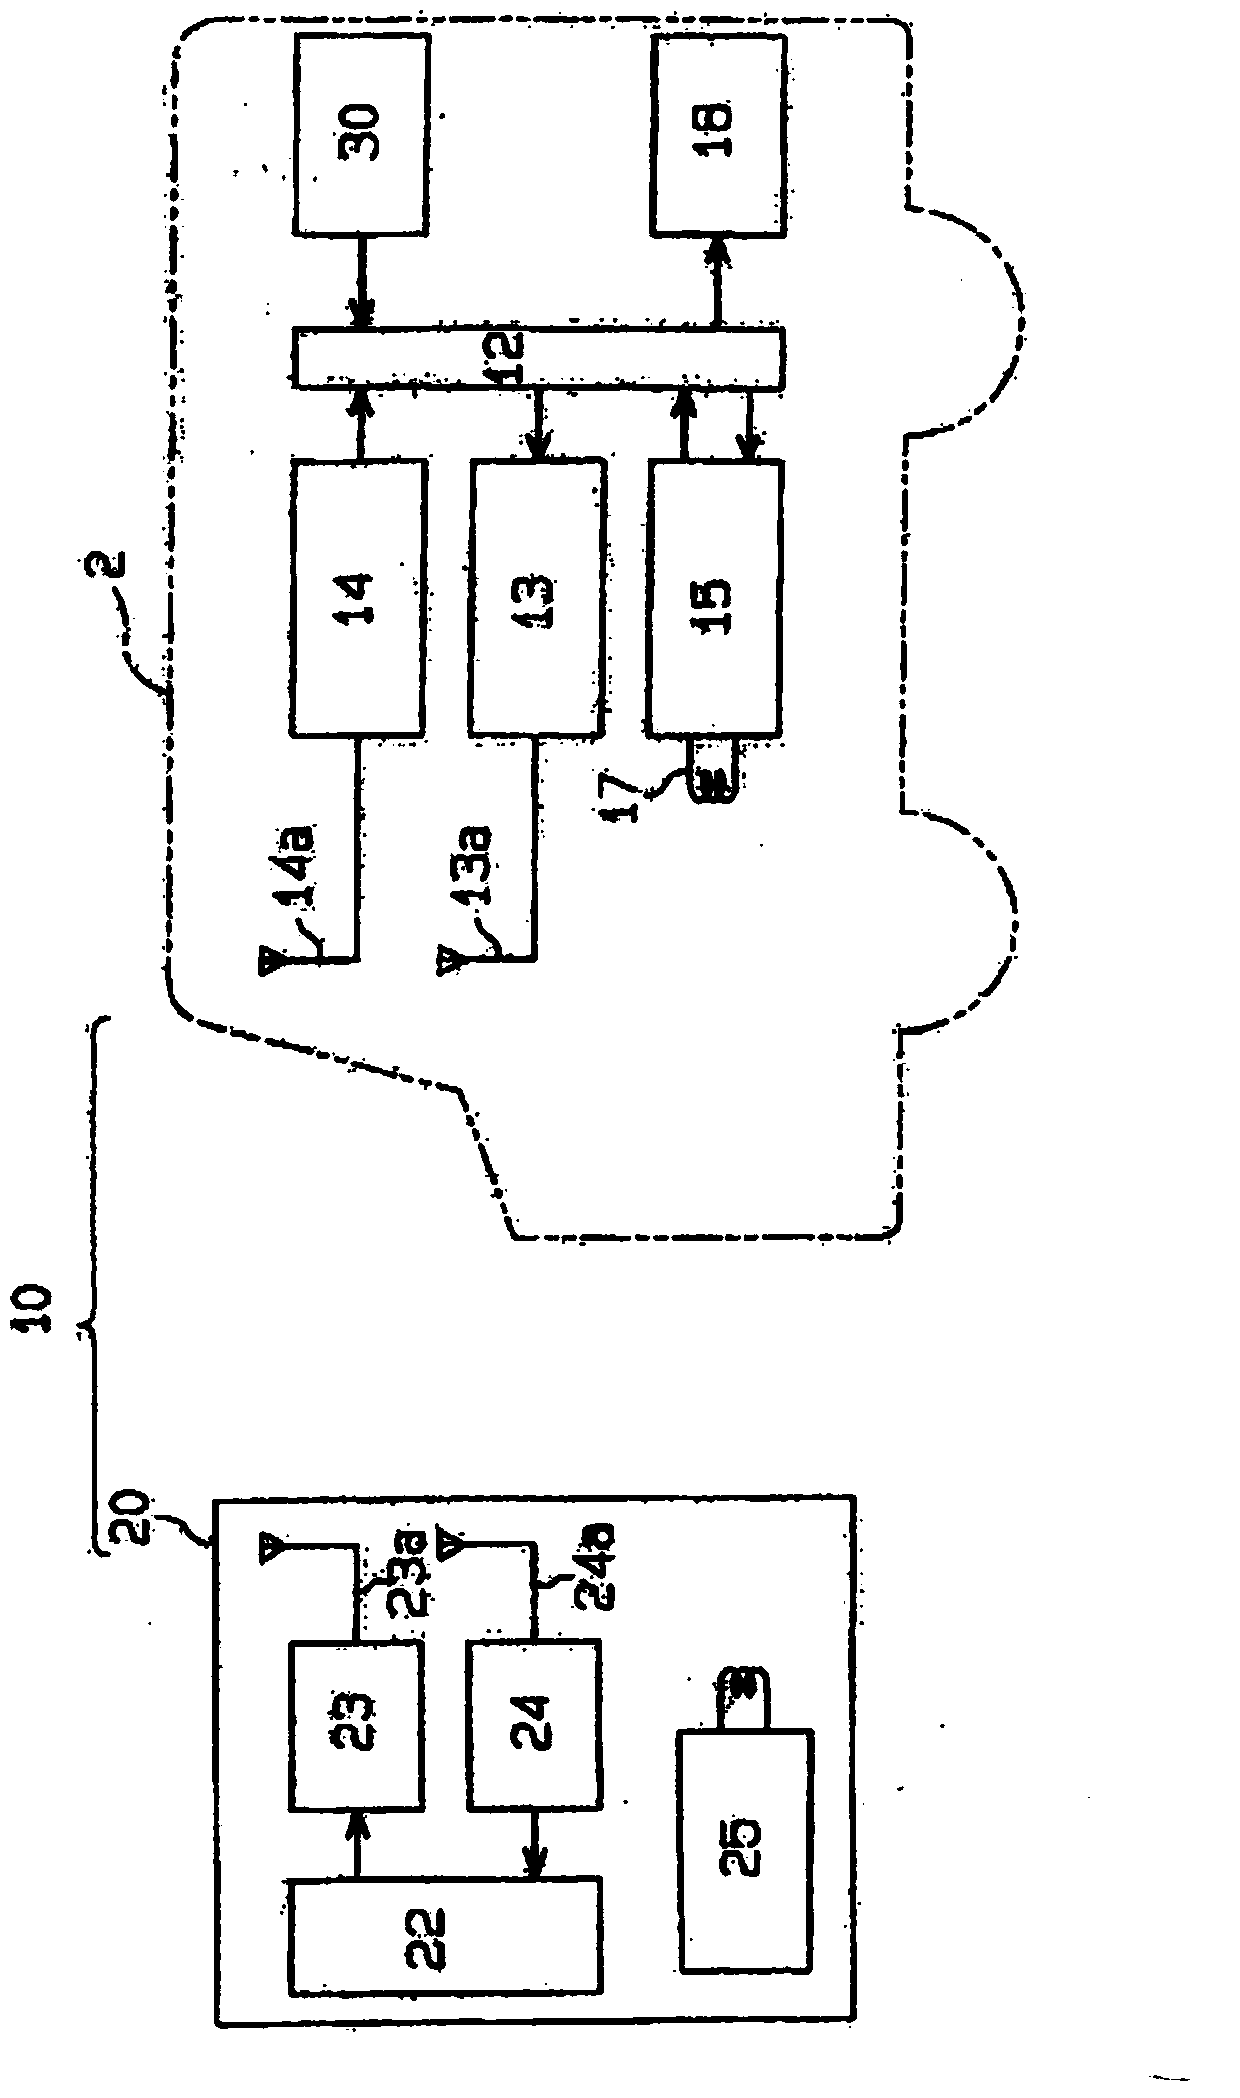 Switching device used for controlling engine of vehicle